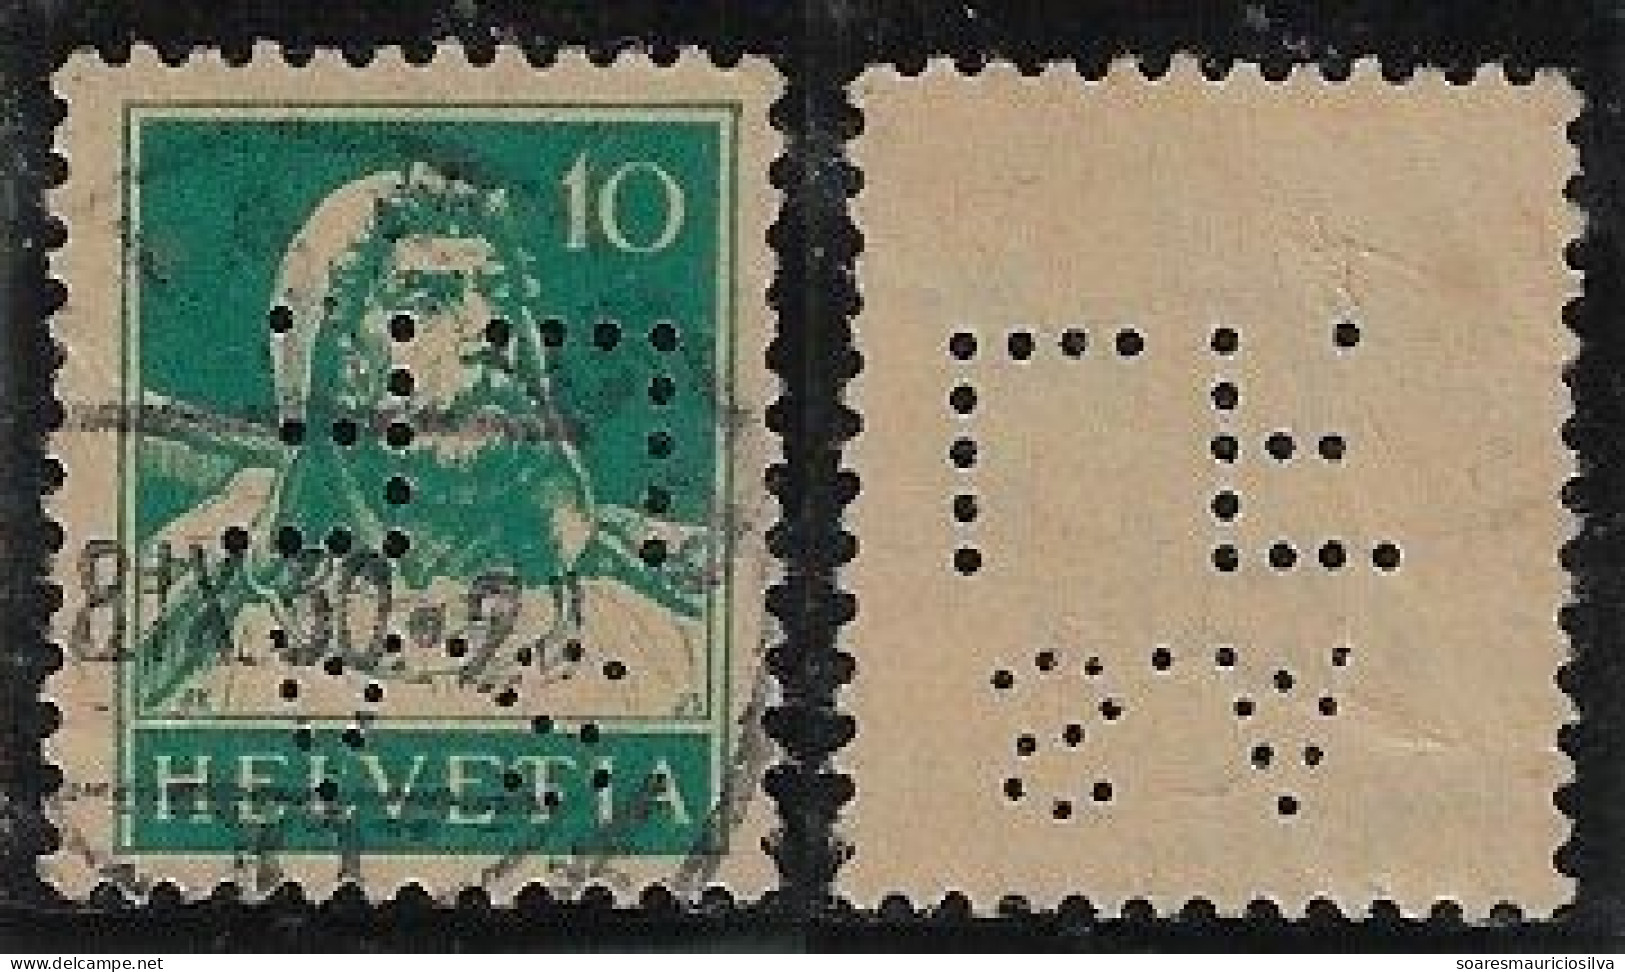 Switzerland 1925/1934 Stamp With Perfin S.A/LF. By SA Svizzera Luciano Franzosini Transport In Chiasso Lochung Perfore - Gezähnt (perforiert)